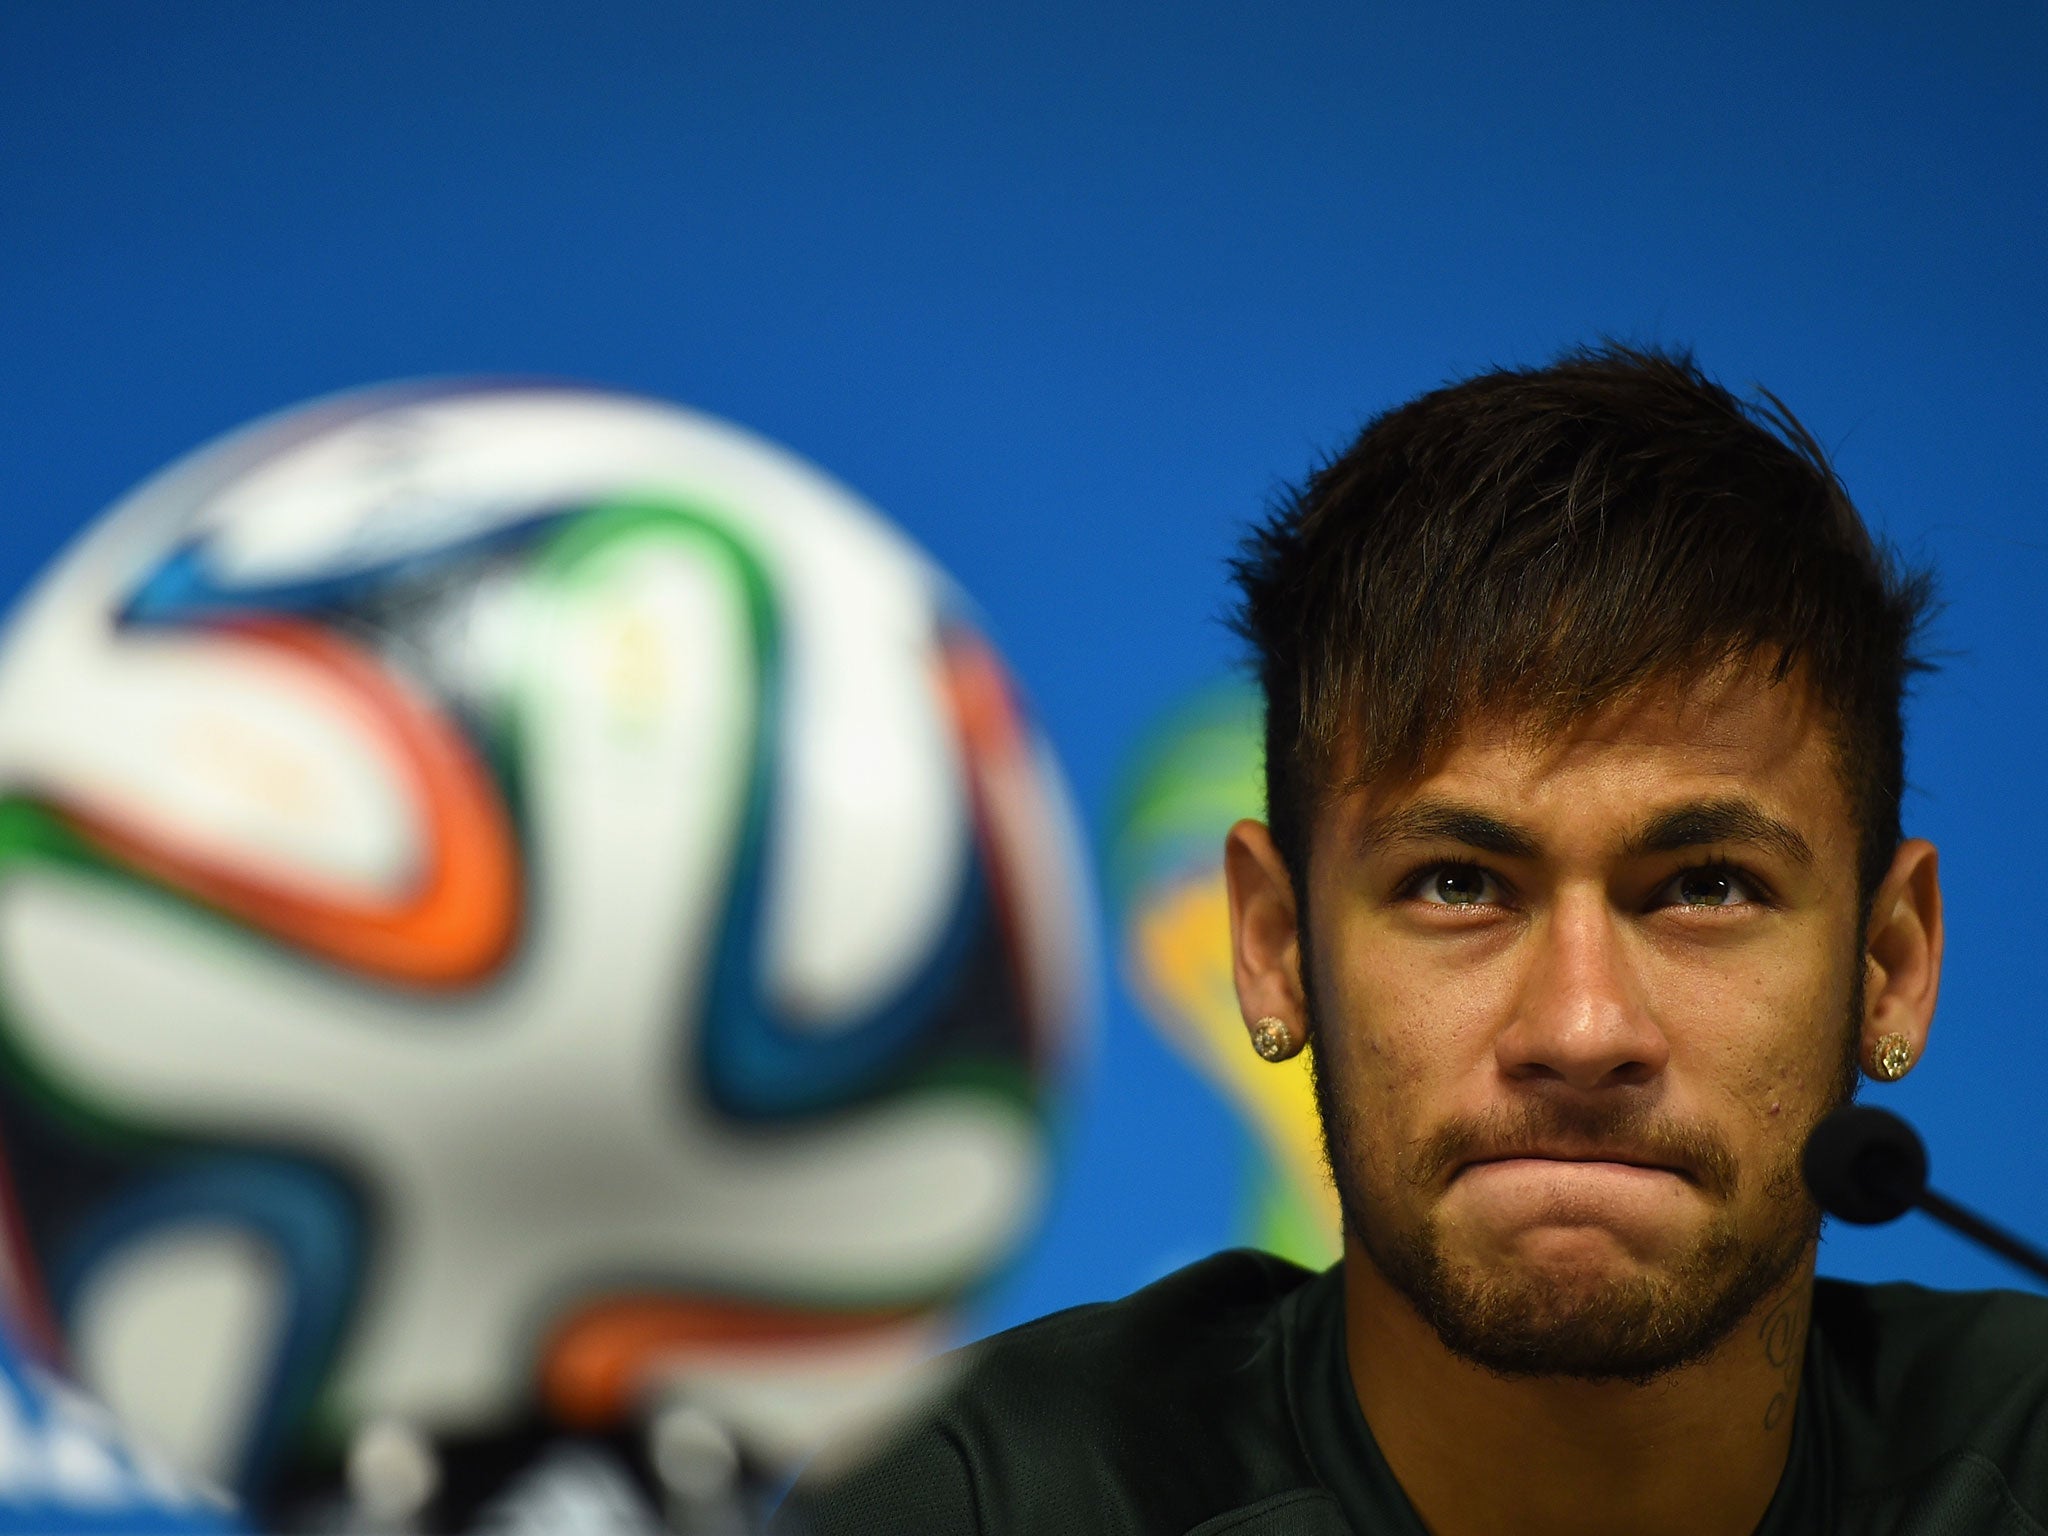 Neymar of Brazil looks on during a Brazil press conference ahead of the 2014 FIFA World Cup Brazil opening match against Croatia at Arena de Sao Paulo in Brazil.